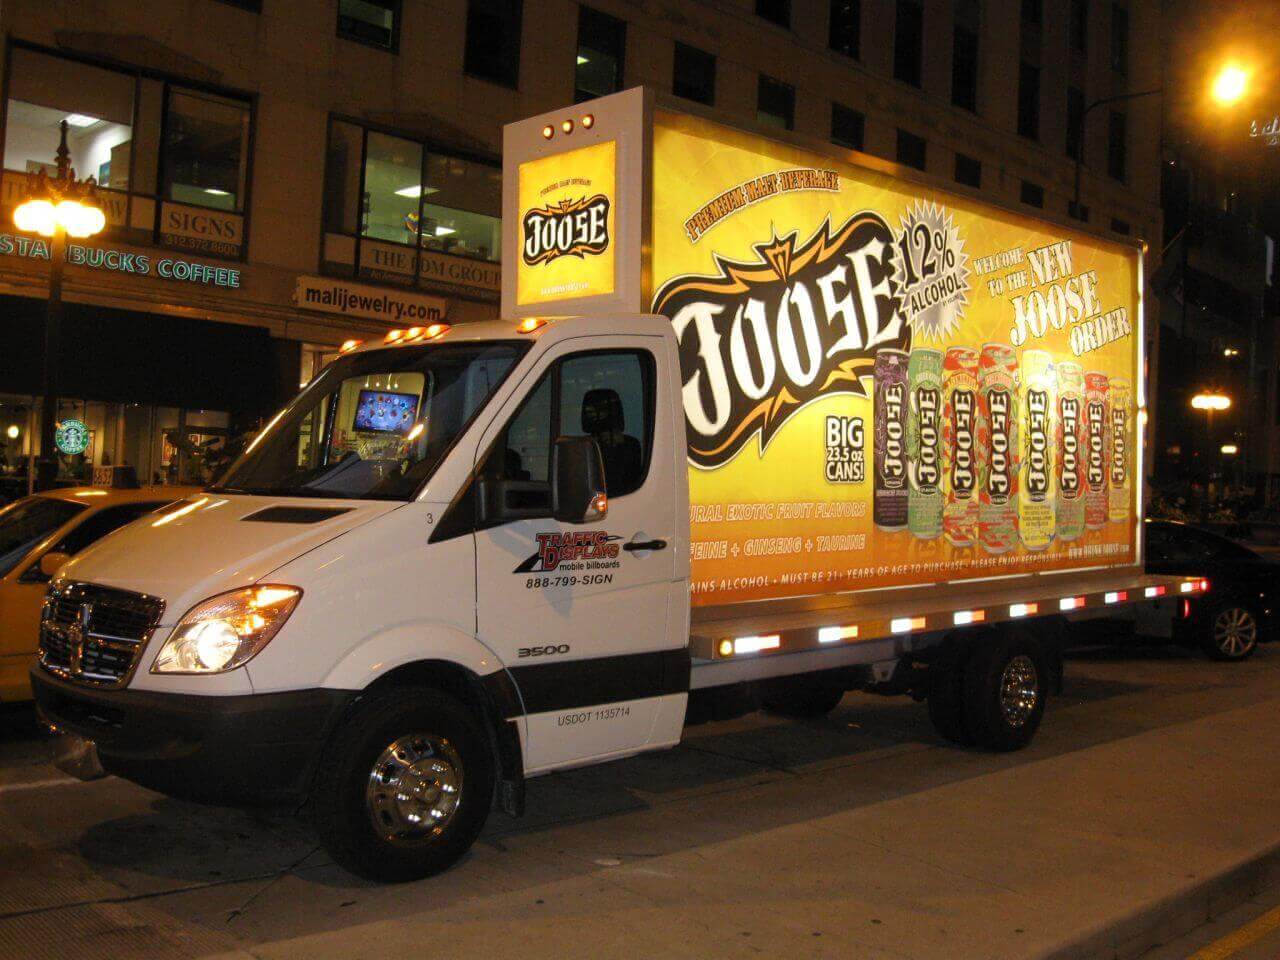 The personality of the brand comes to life on a mobile billboard